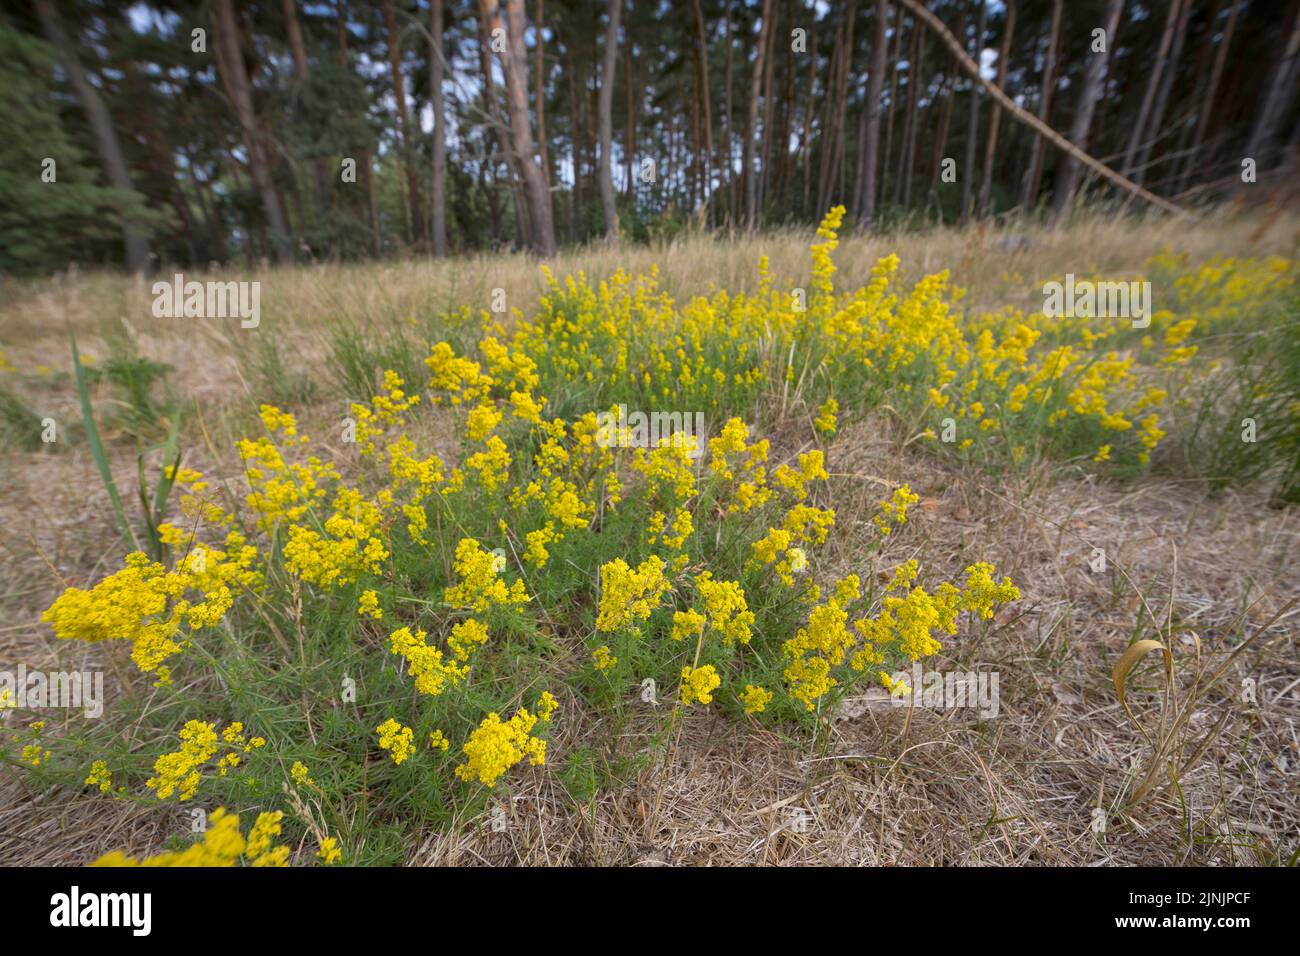 Ladys bedstraw, Yellow bedstraw, Yellow spring bedstraw (Galium verum), blooming population at forest edge, Germany Stock Photo